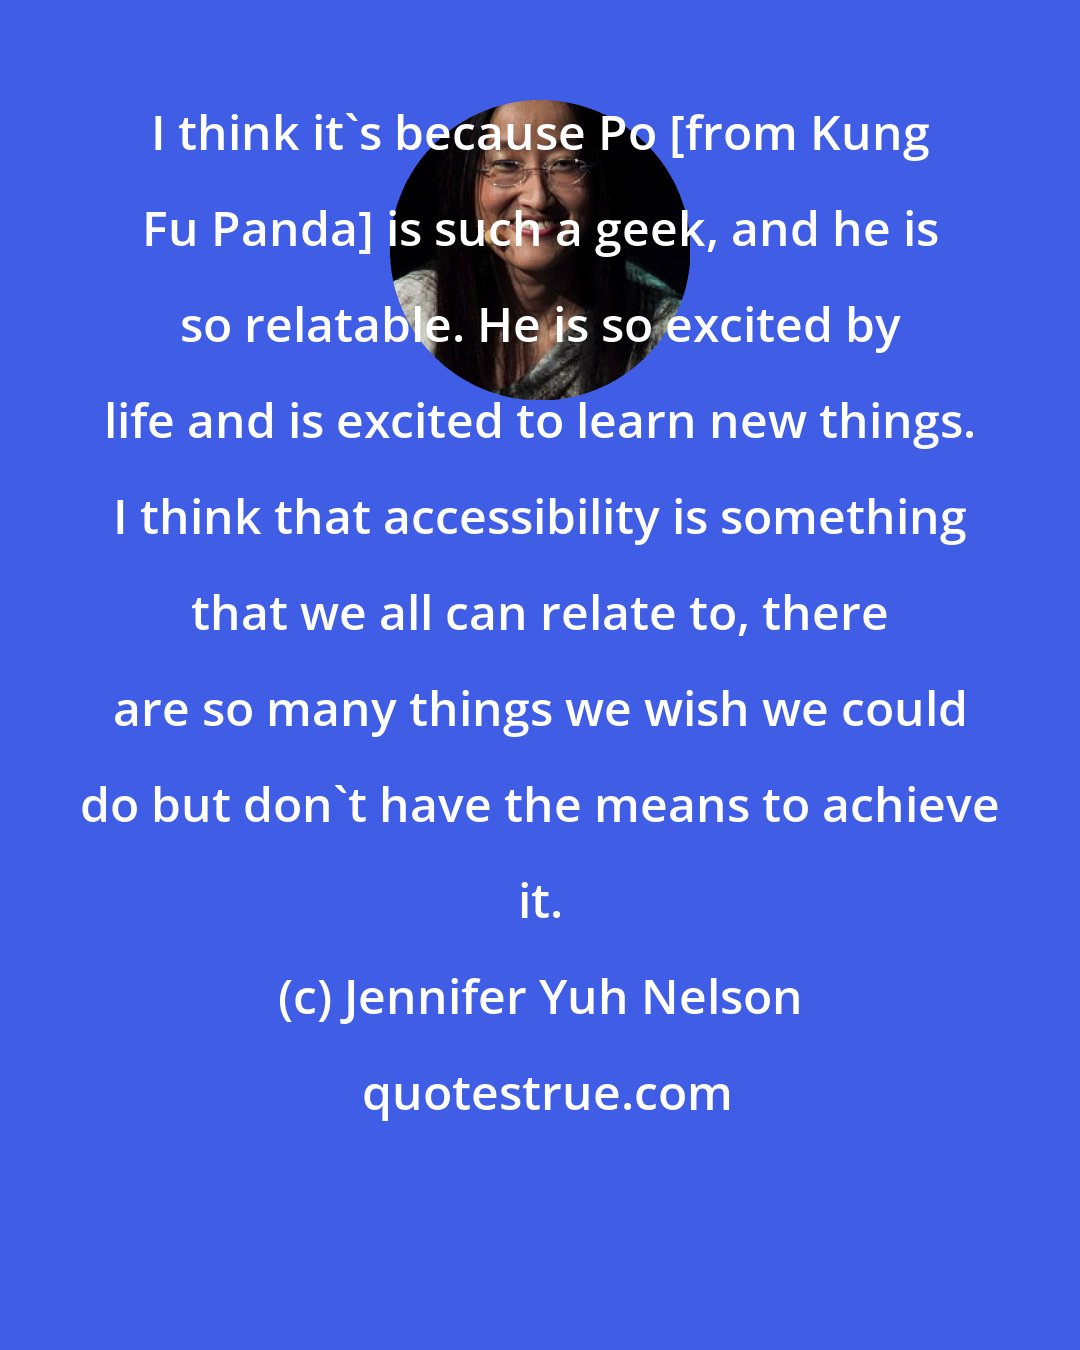 Jennifer Yuh Nelson: I think it's because Po [from Kung Fu Panda] is such a geek, and he is so relatable. He is so excited by life and is excited to learn new things. I think that accessibility is something that we all can relate to, there are so many things we wish we could do but don't have the means to achieve it.